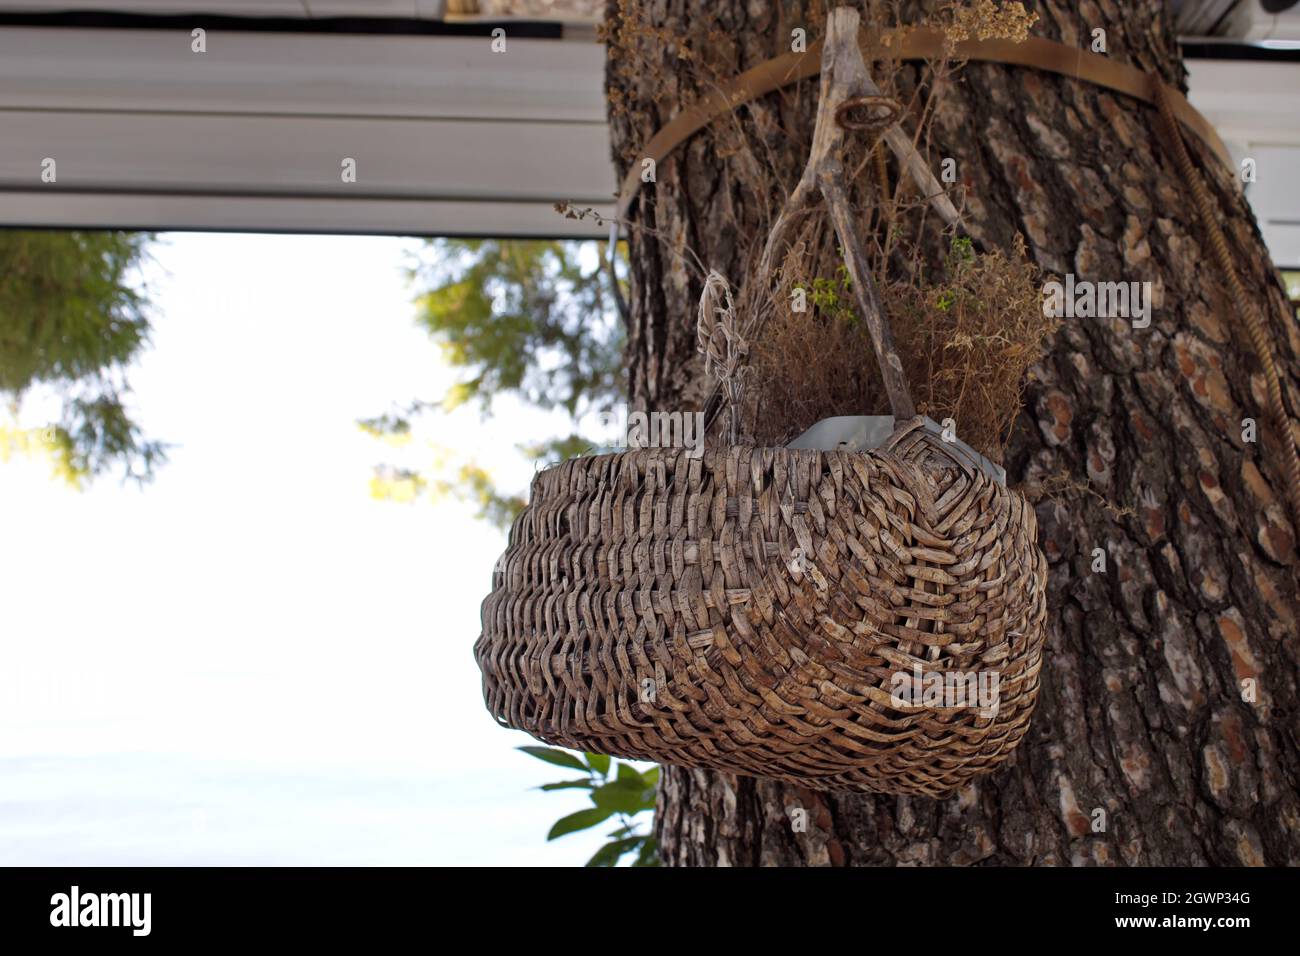 A wicker basket hanging on a tree trunk Stock Photo - Alamy